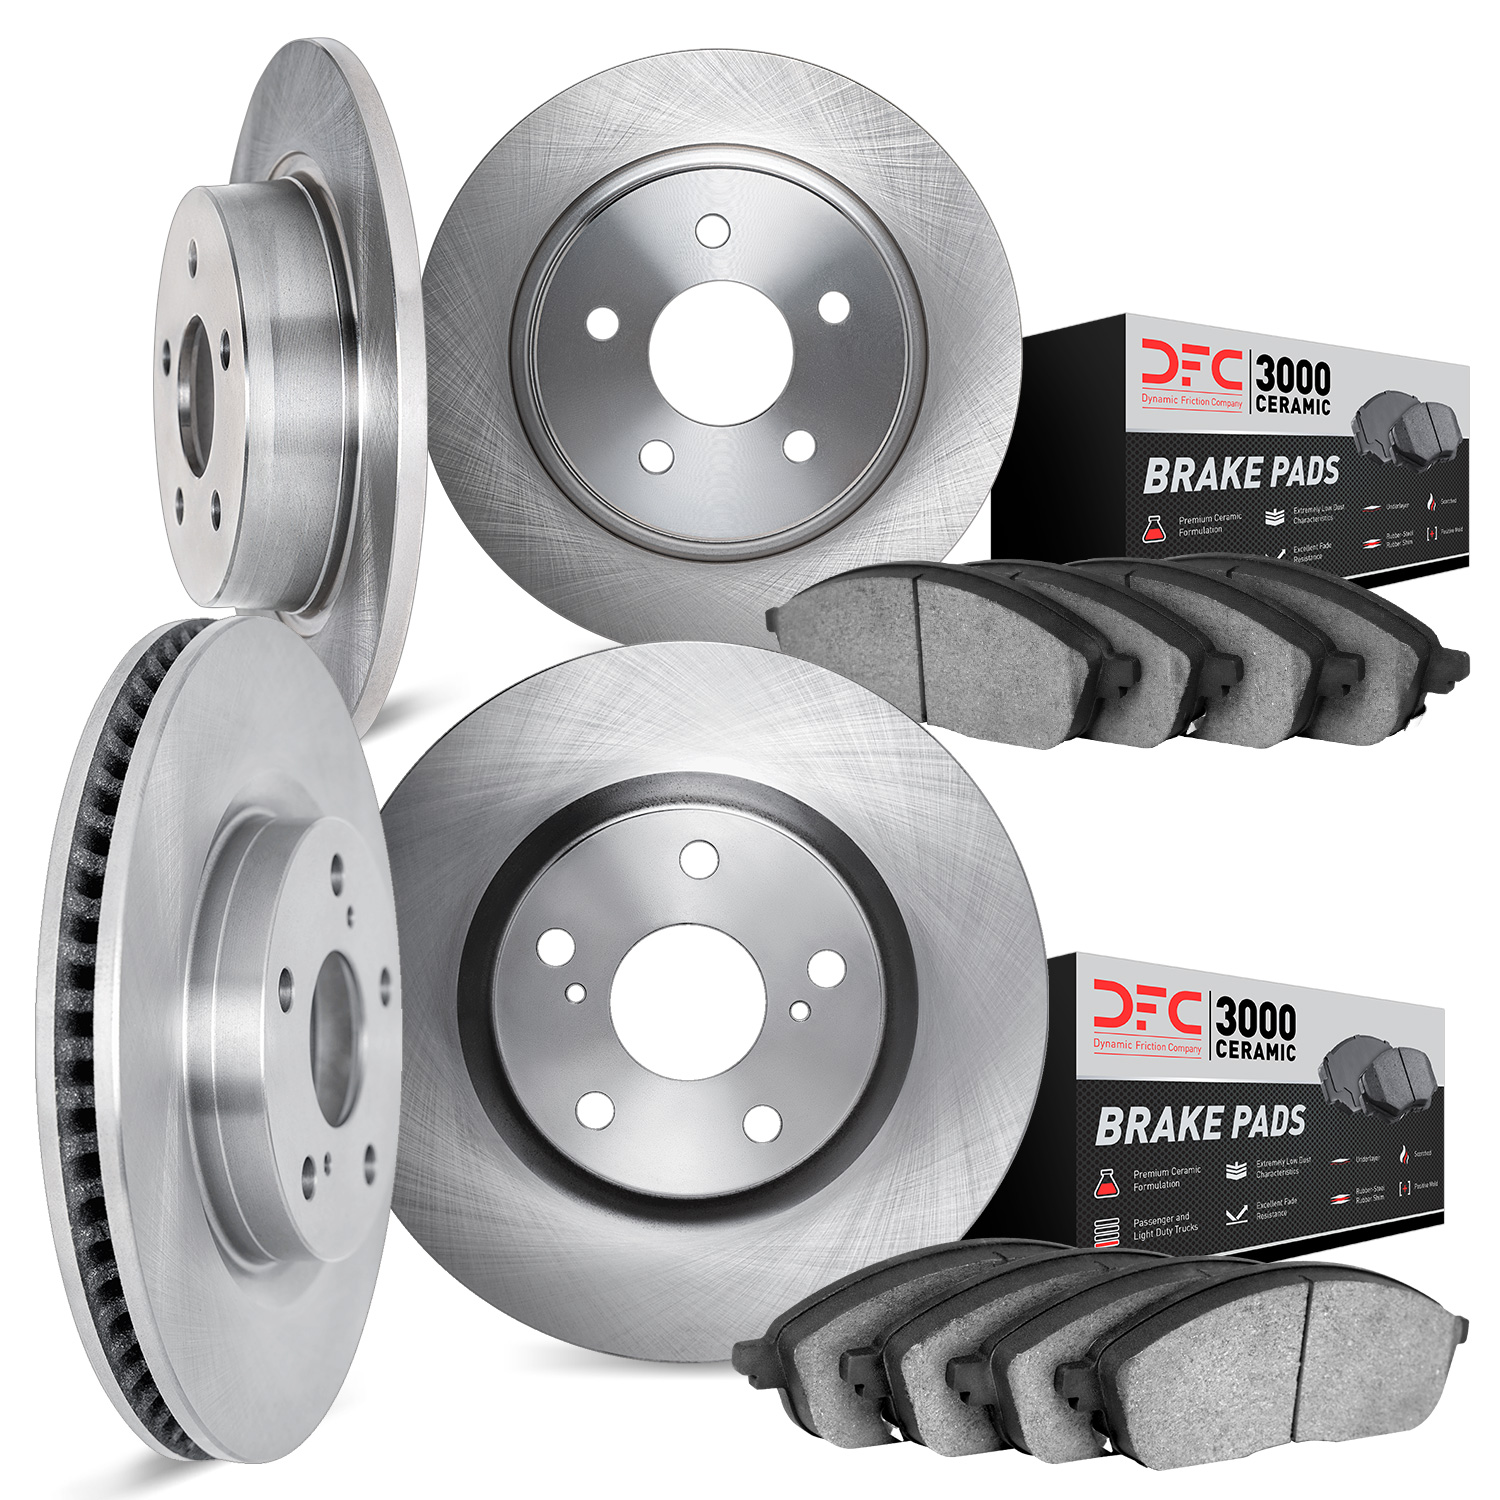 6304-74047 Brake Rotors with 3000-Series Ceramic Brake Pads Kit, 2009-2018 Audi/Volkswagen, Position: Front and Rear